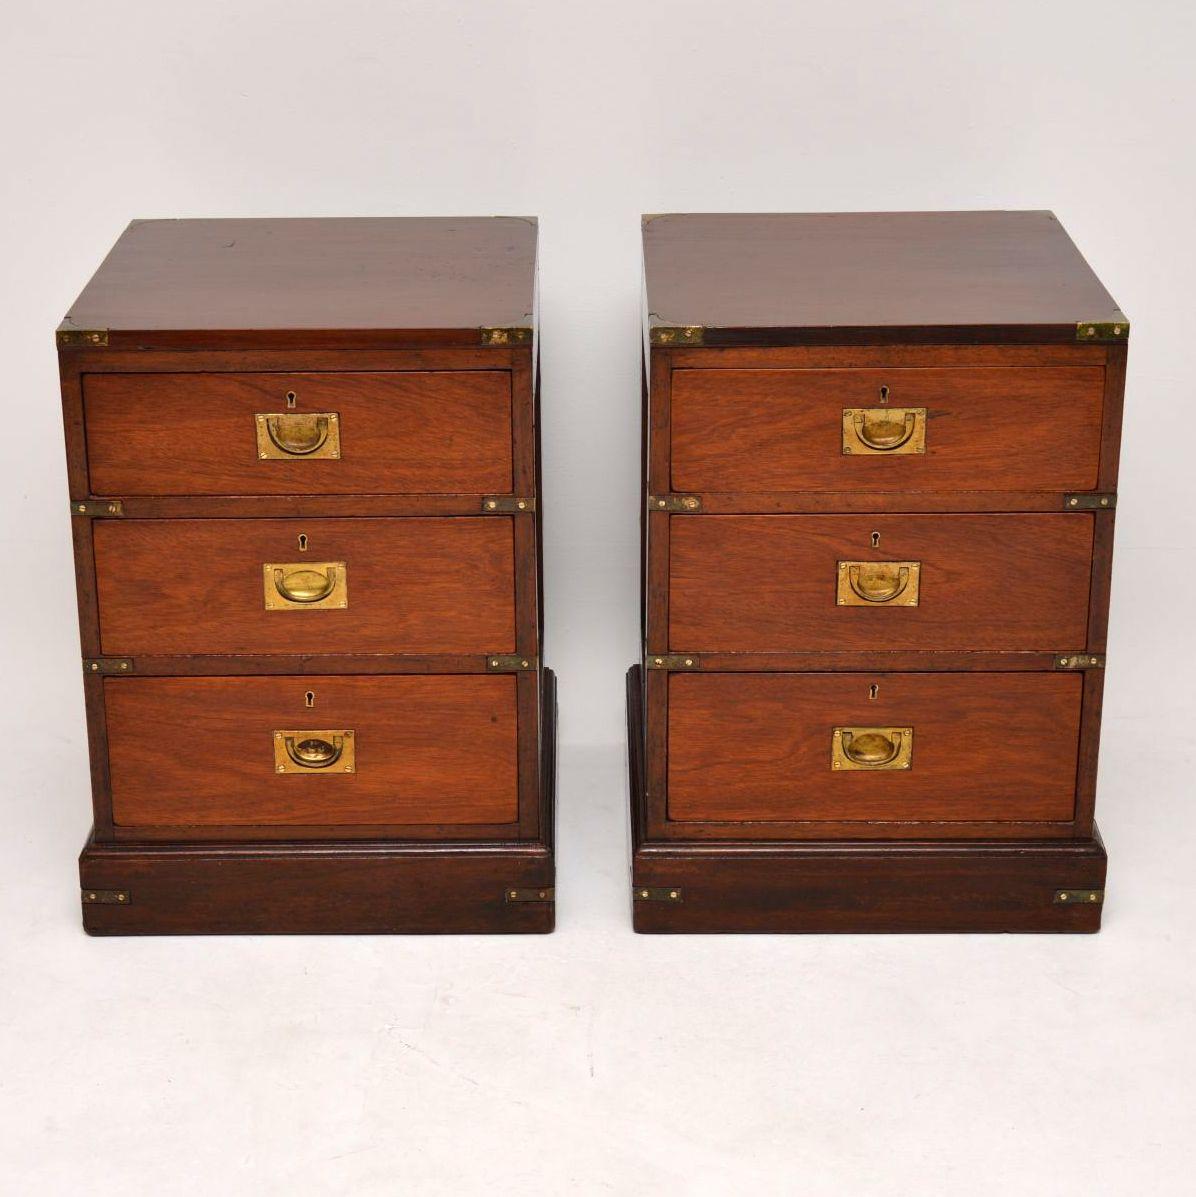 This pair of antique mahogany Campaign bedside chests are fine quality and are very impressive. They have been adapted from a Victorian larger item of furniture, so the wood is original and shows plenty of character. My cabinet maker really went to